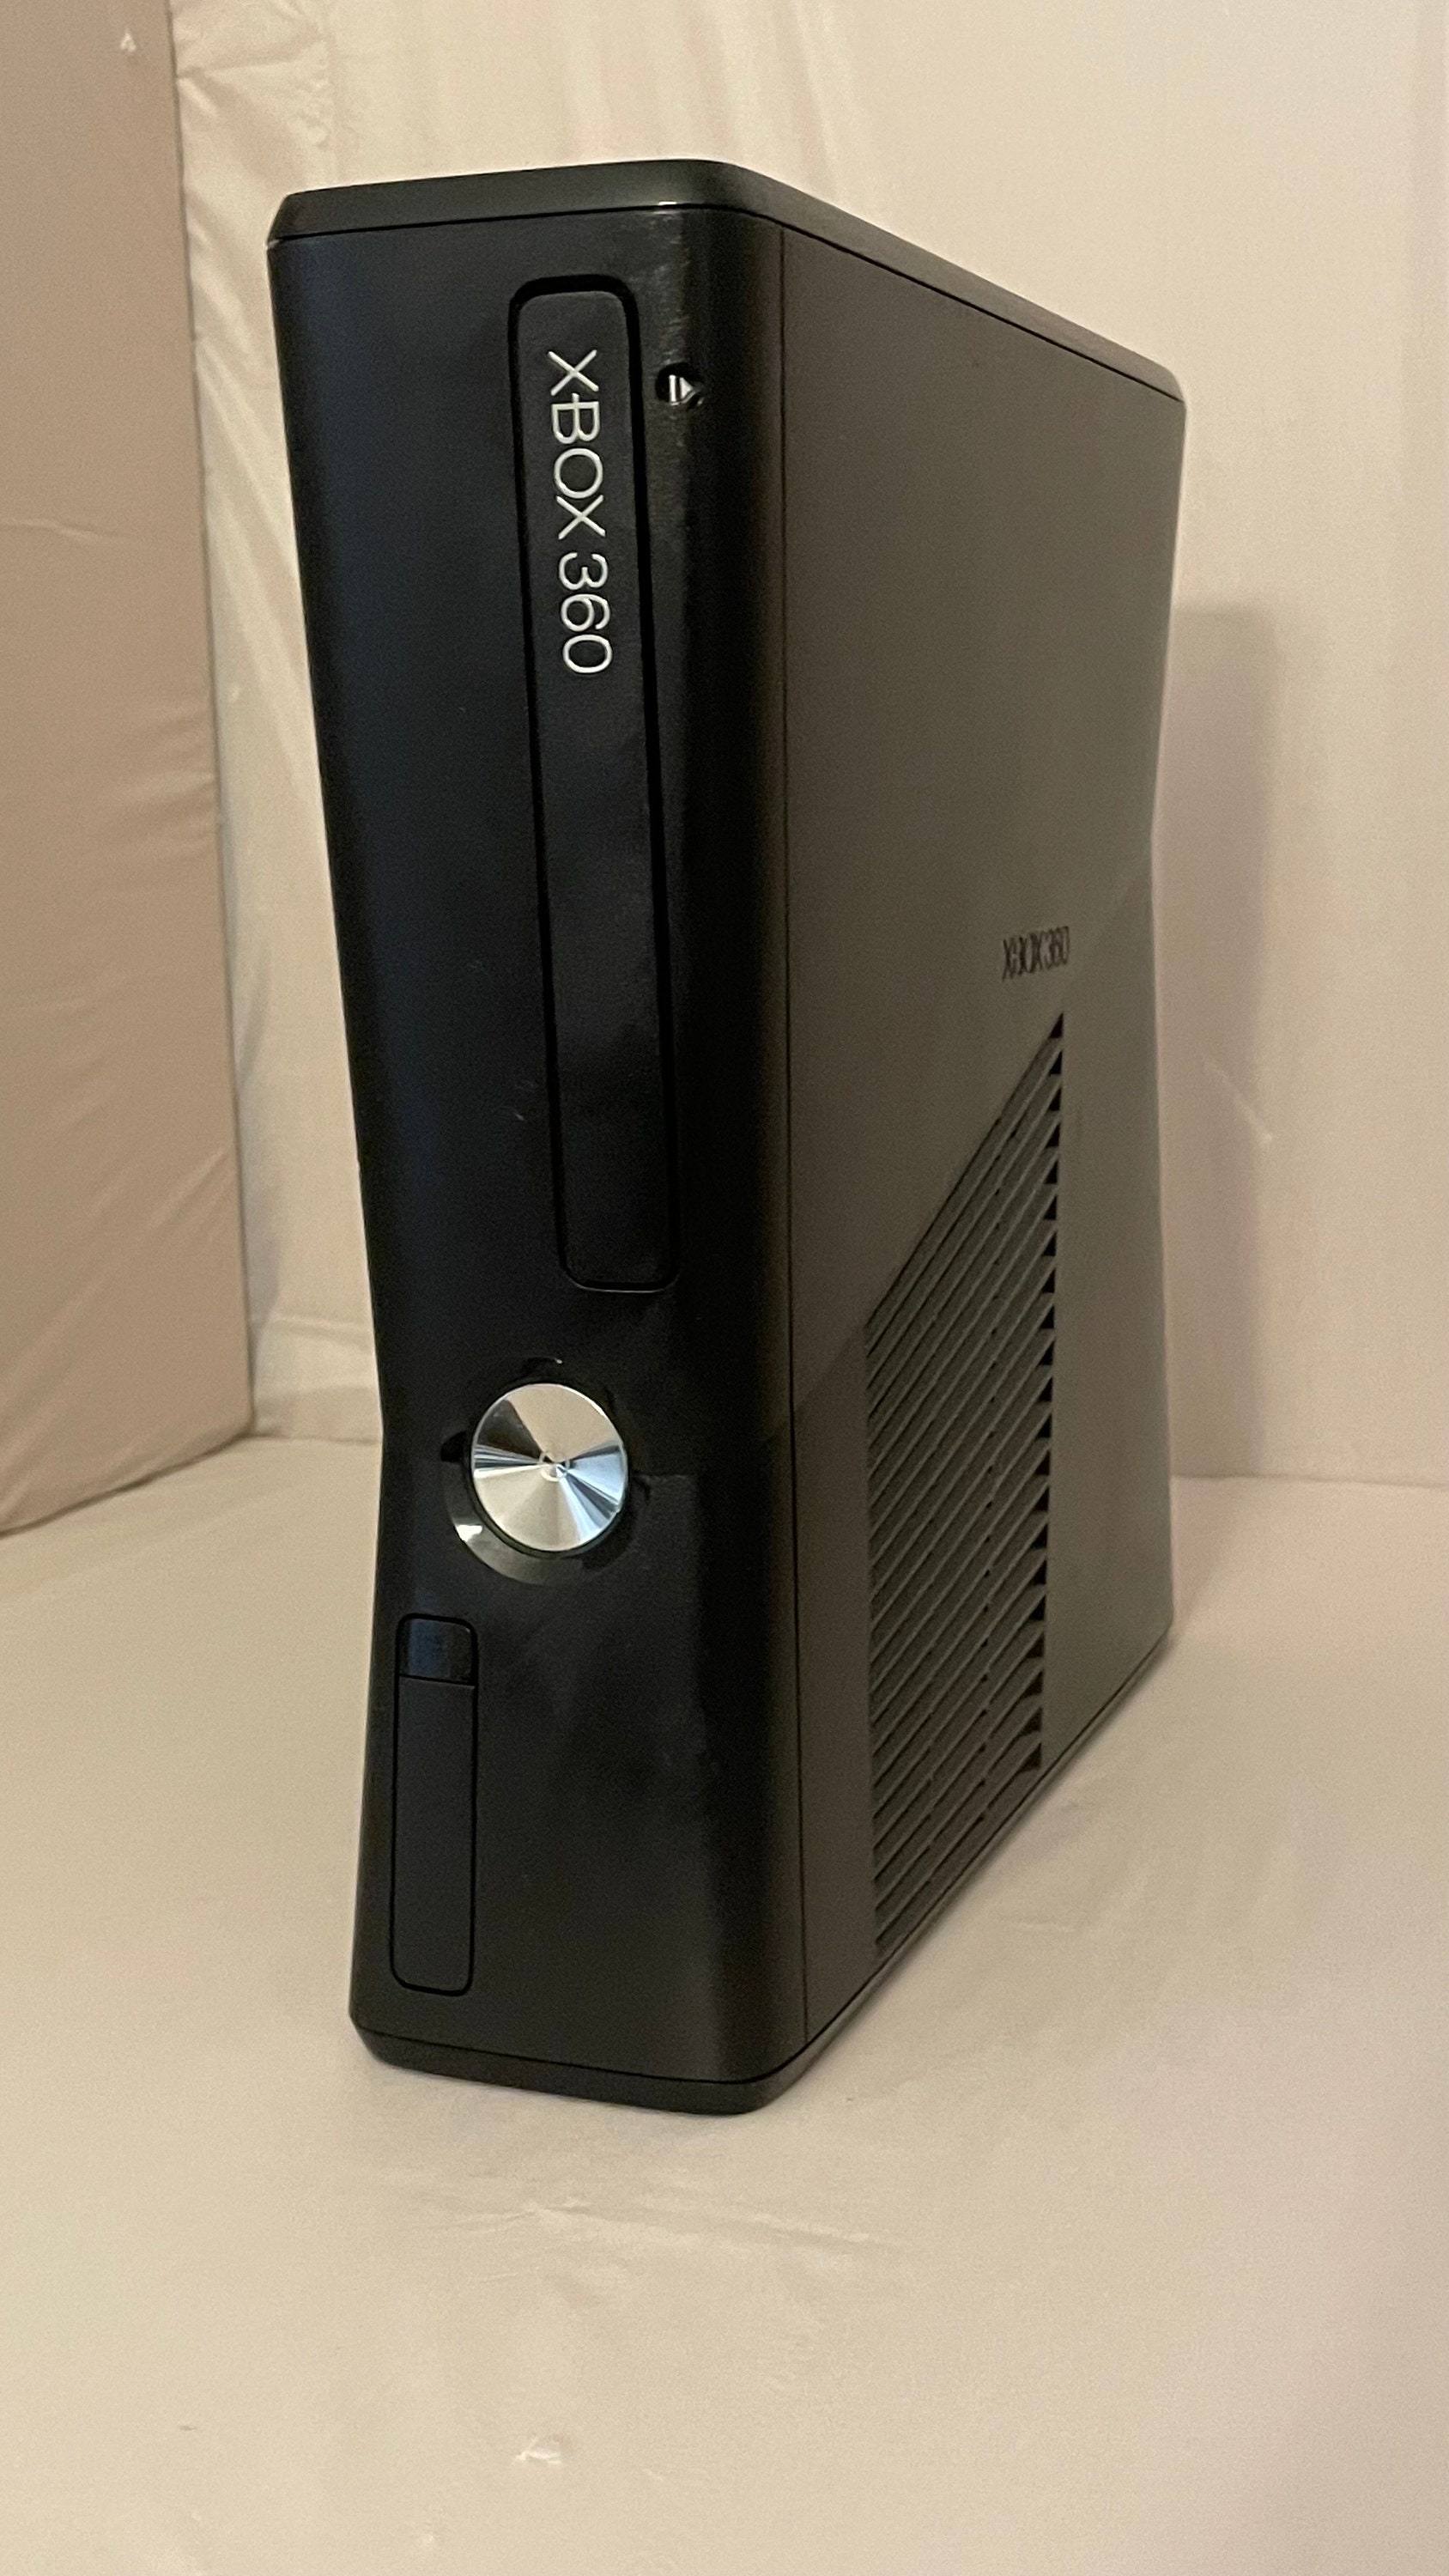 Xbox 360 RGH 3 RGH 1.2 Consoles Phats & Slims 250GB Hdd CFB Revamped 